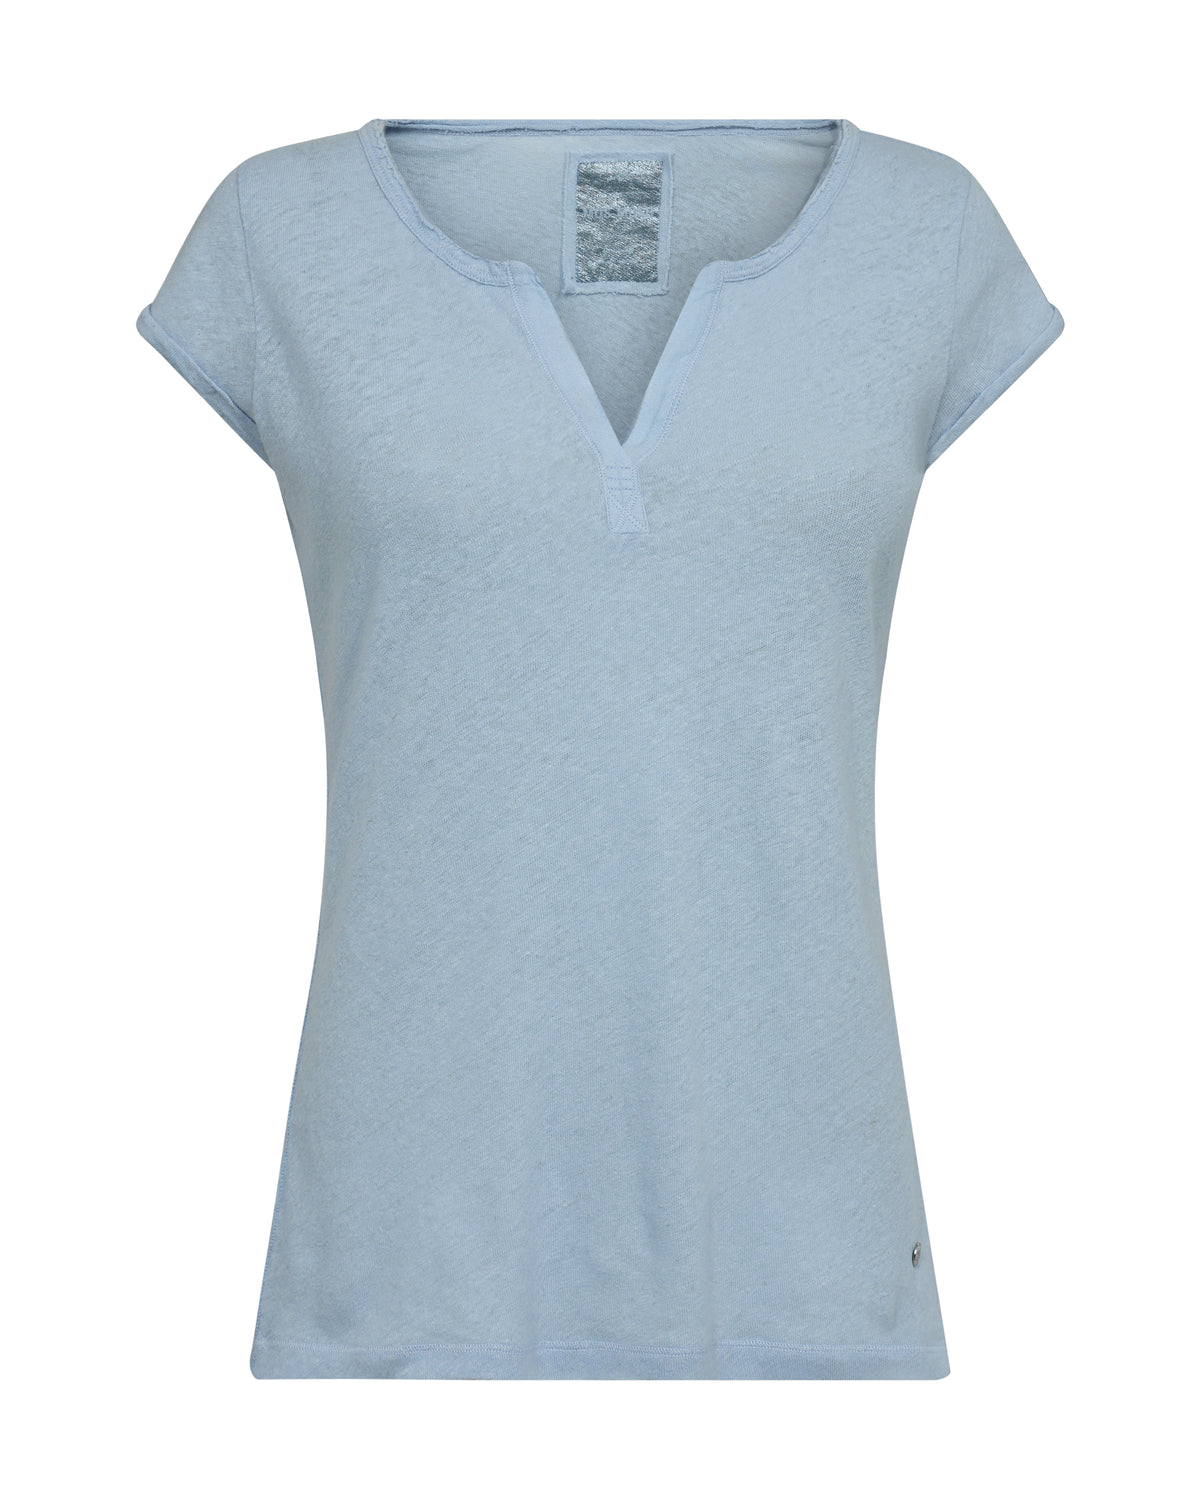 Front view of linen and cotton blend t shirt with a notch neck and short sleeves